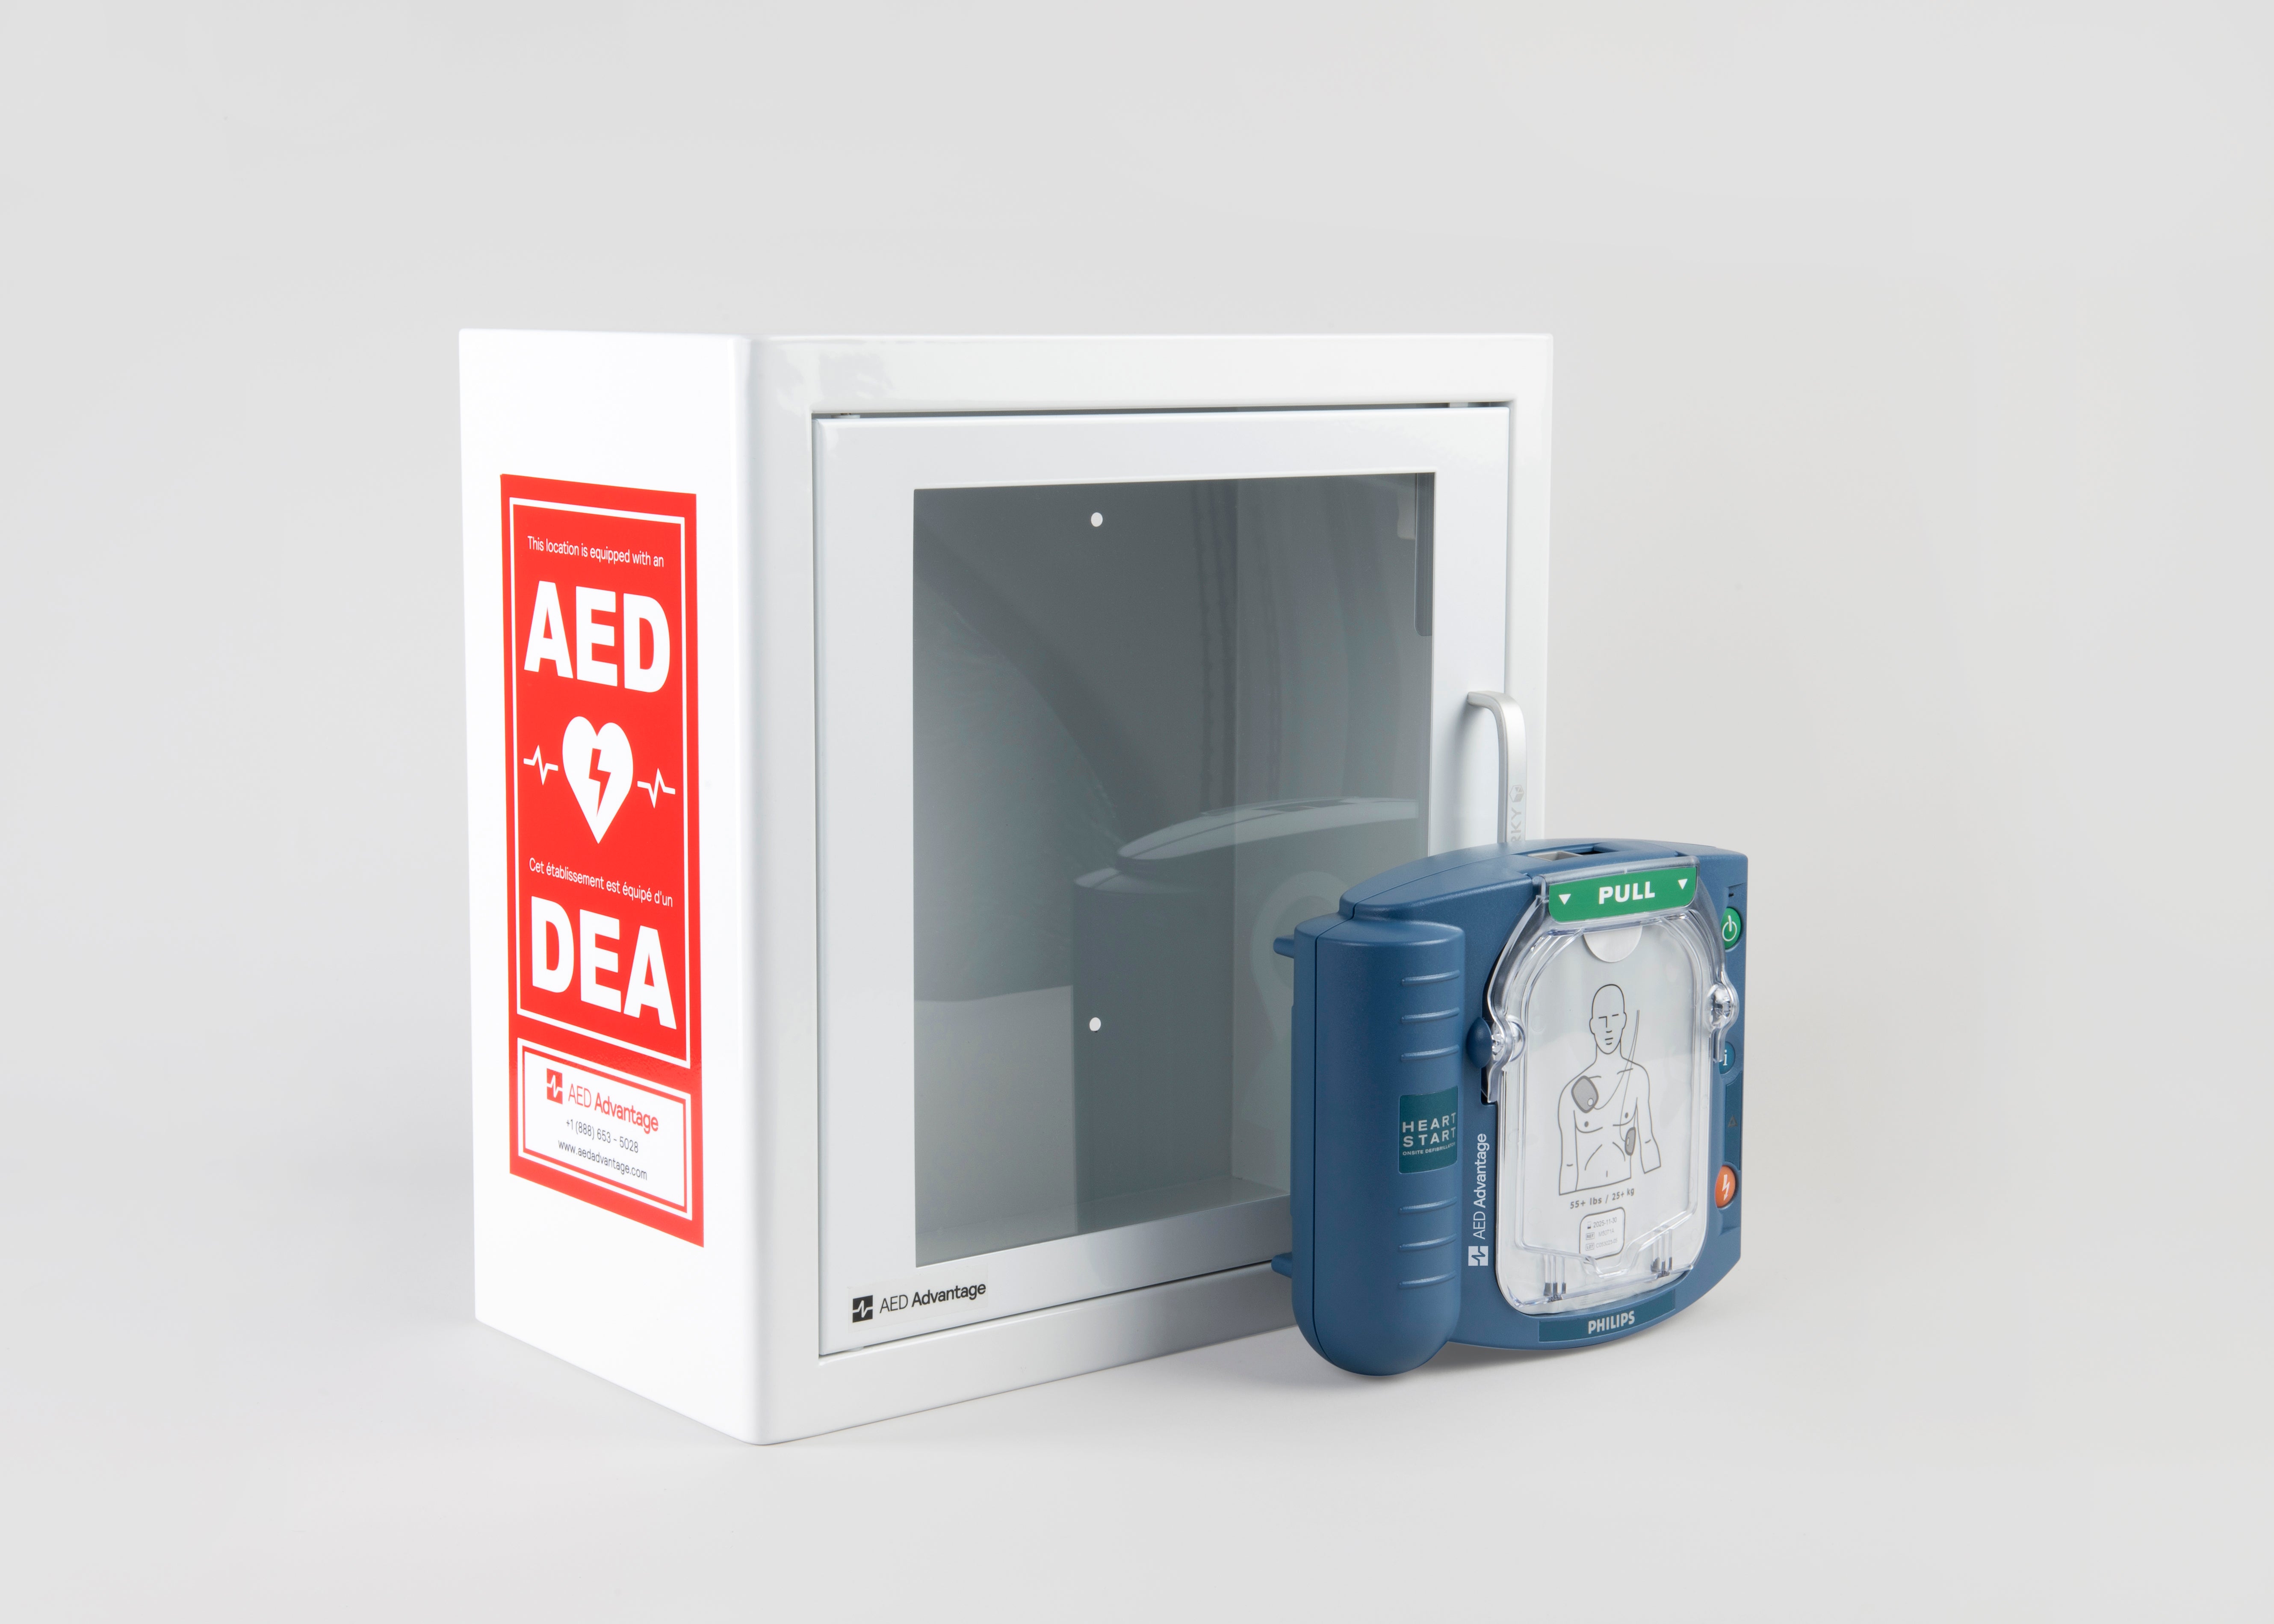 A blue Philips OnSite AED standing in front of a white metal cabinet with red decals